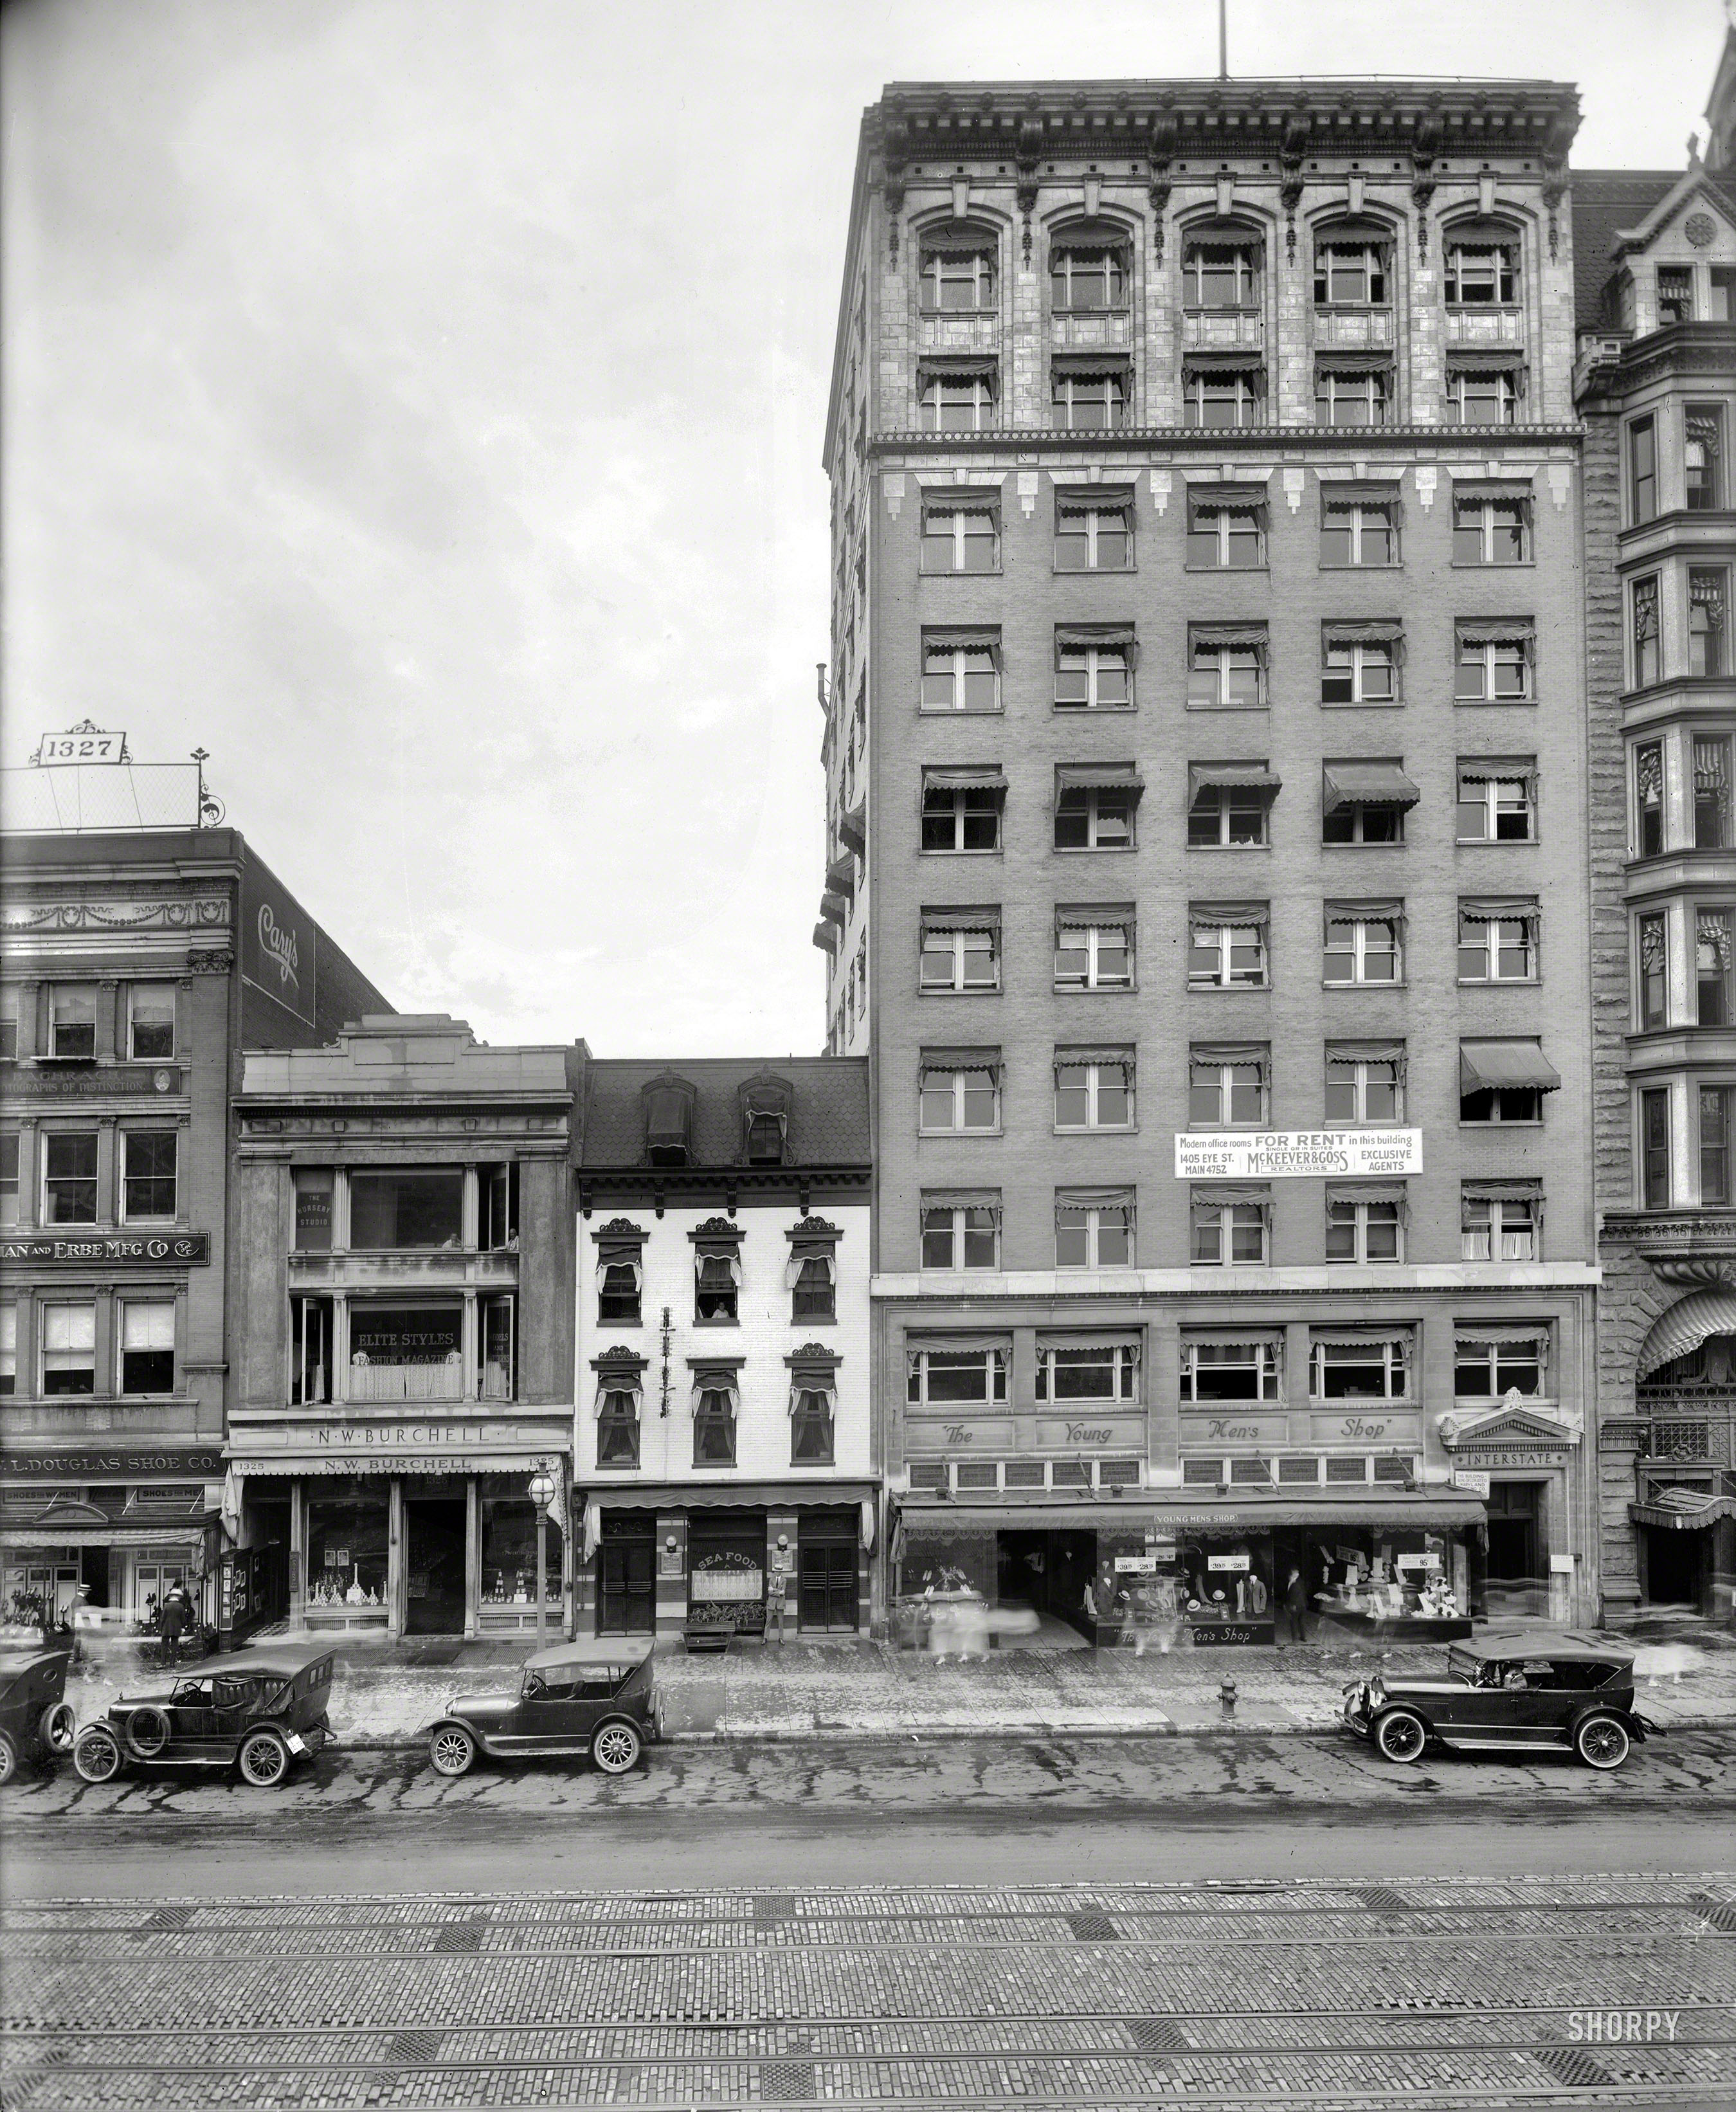 Washington, D.C., 1921. "Interstate Building, F Street N.W." Sharing the sidewalk with the Young Men's Shop, Losekam's Cafe and a smattering of spectral pedestrians. National Photo Company Collection glass negative. View full size.